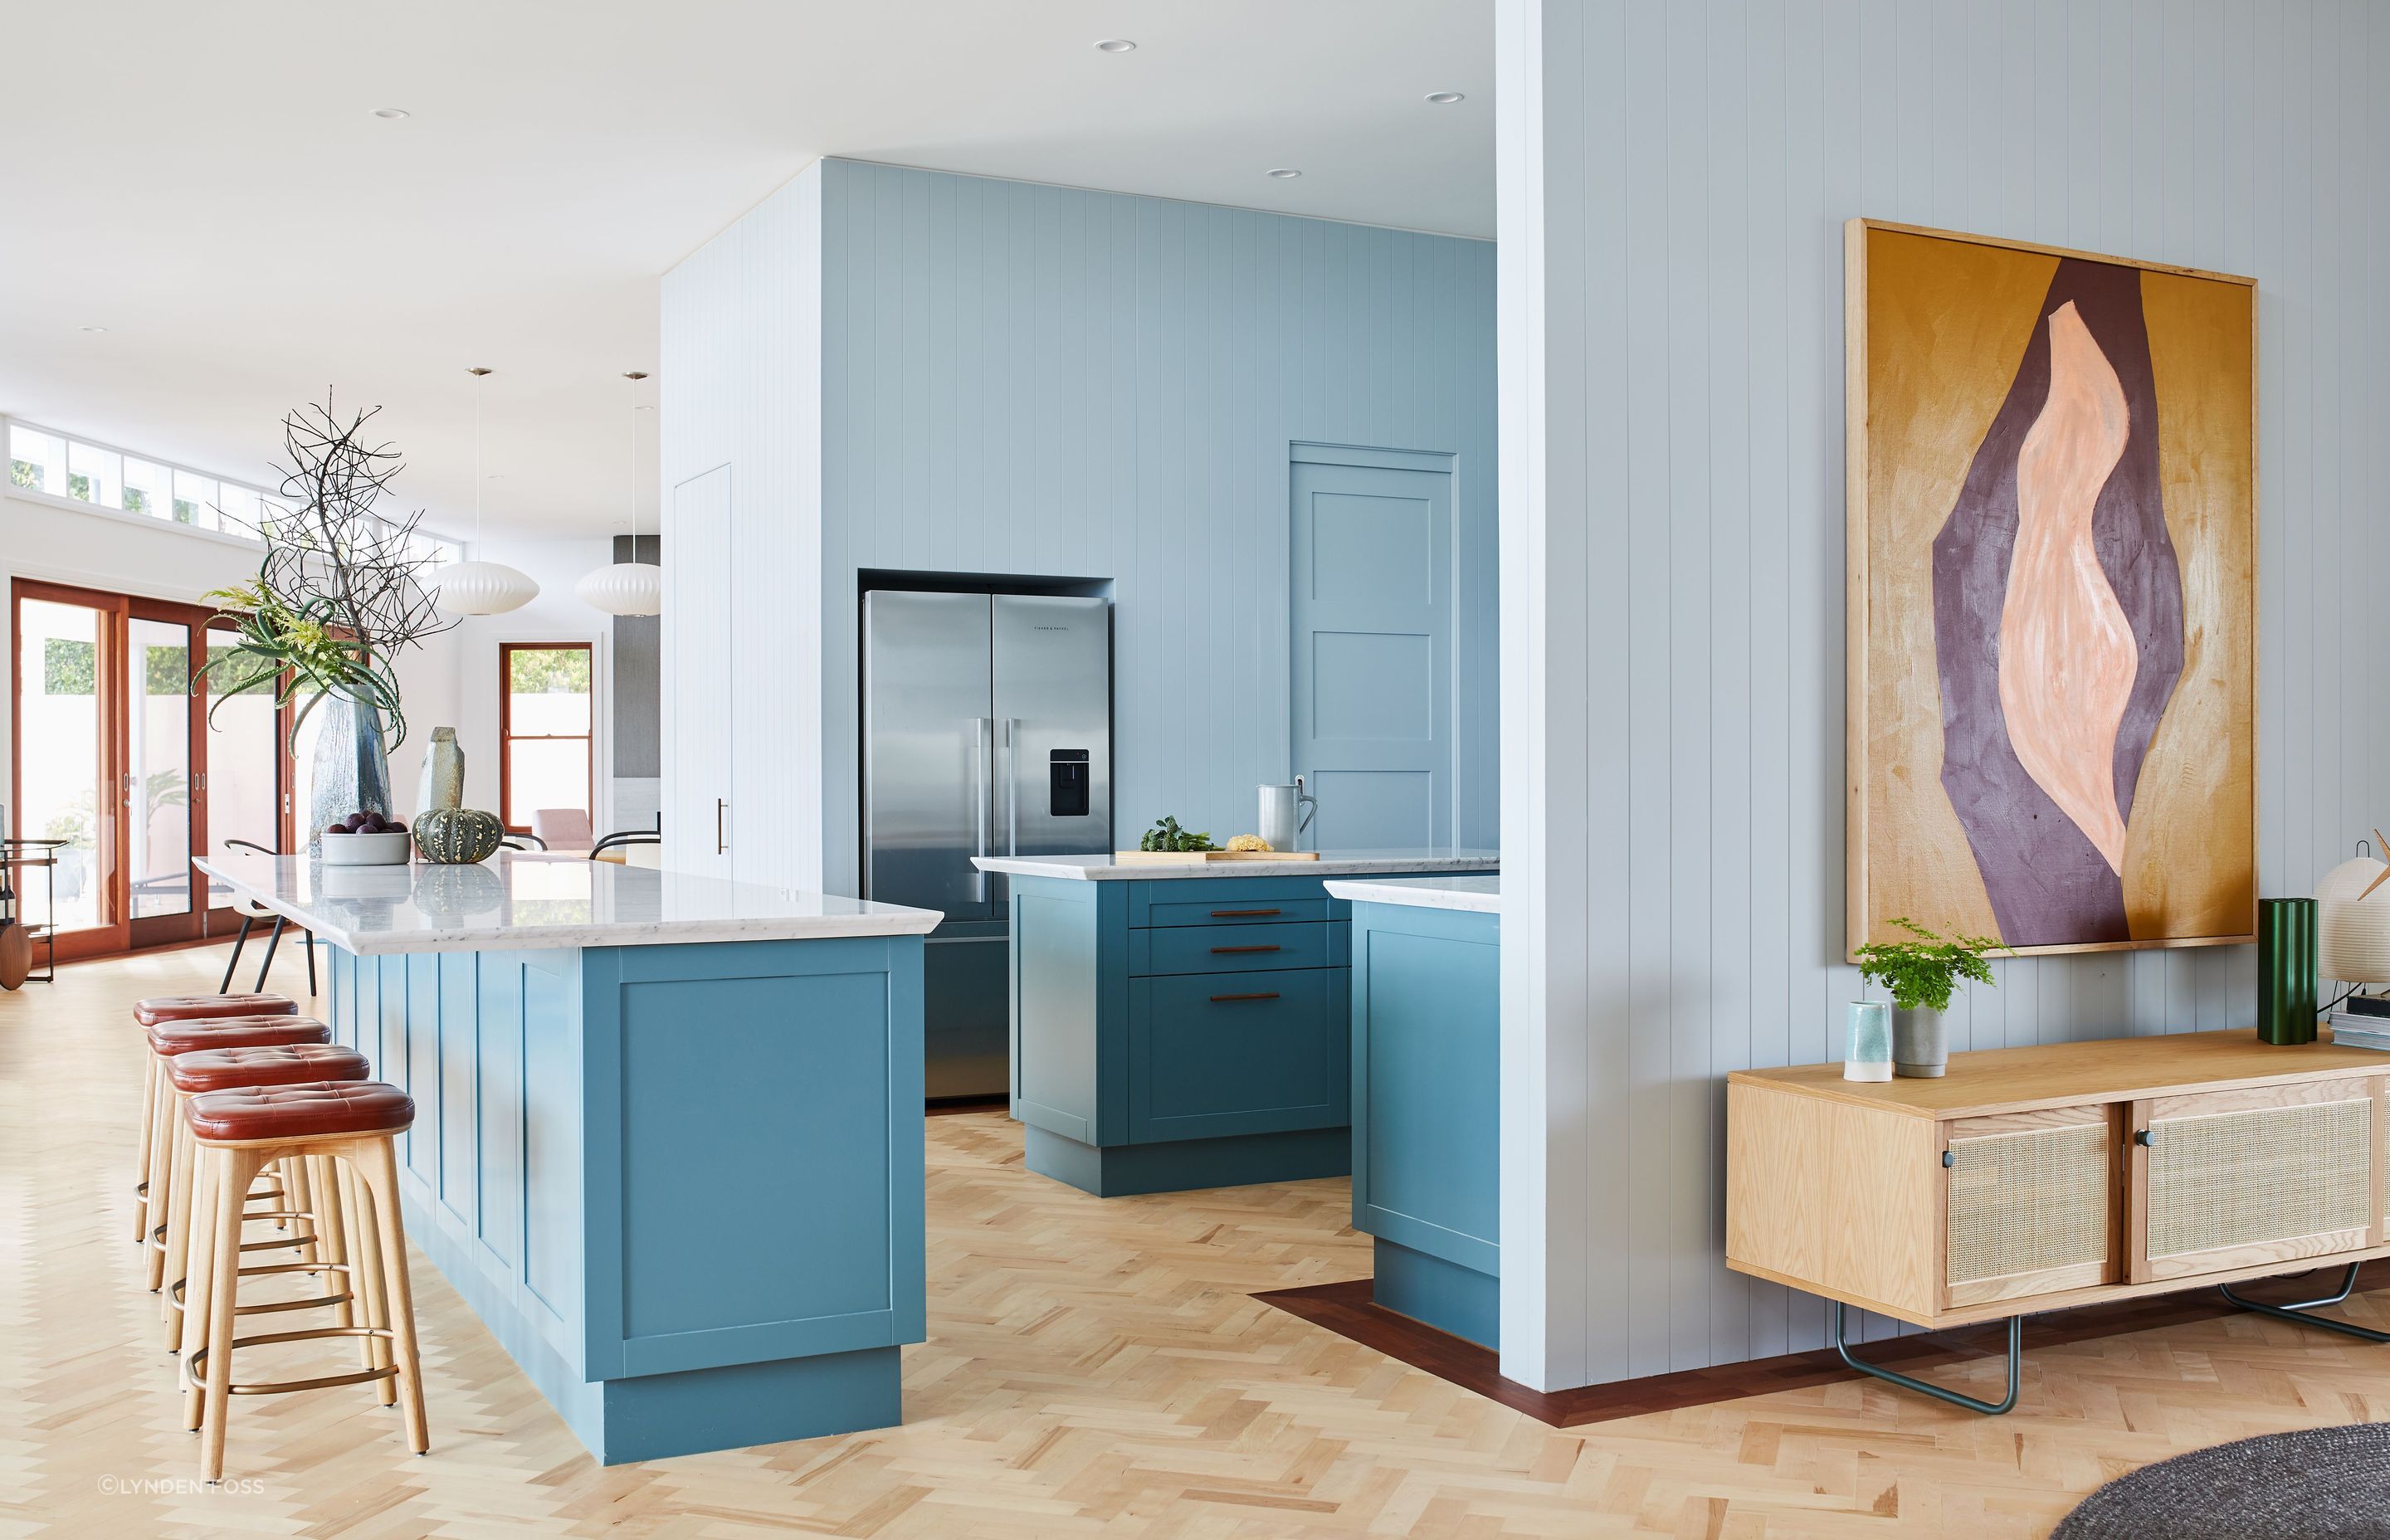 The soft dusty blue wraps around both sides of the kitchen walls and contrasts serenely with the teal cabinetry.